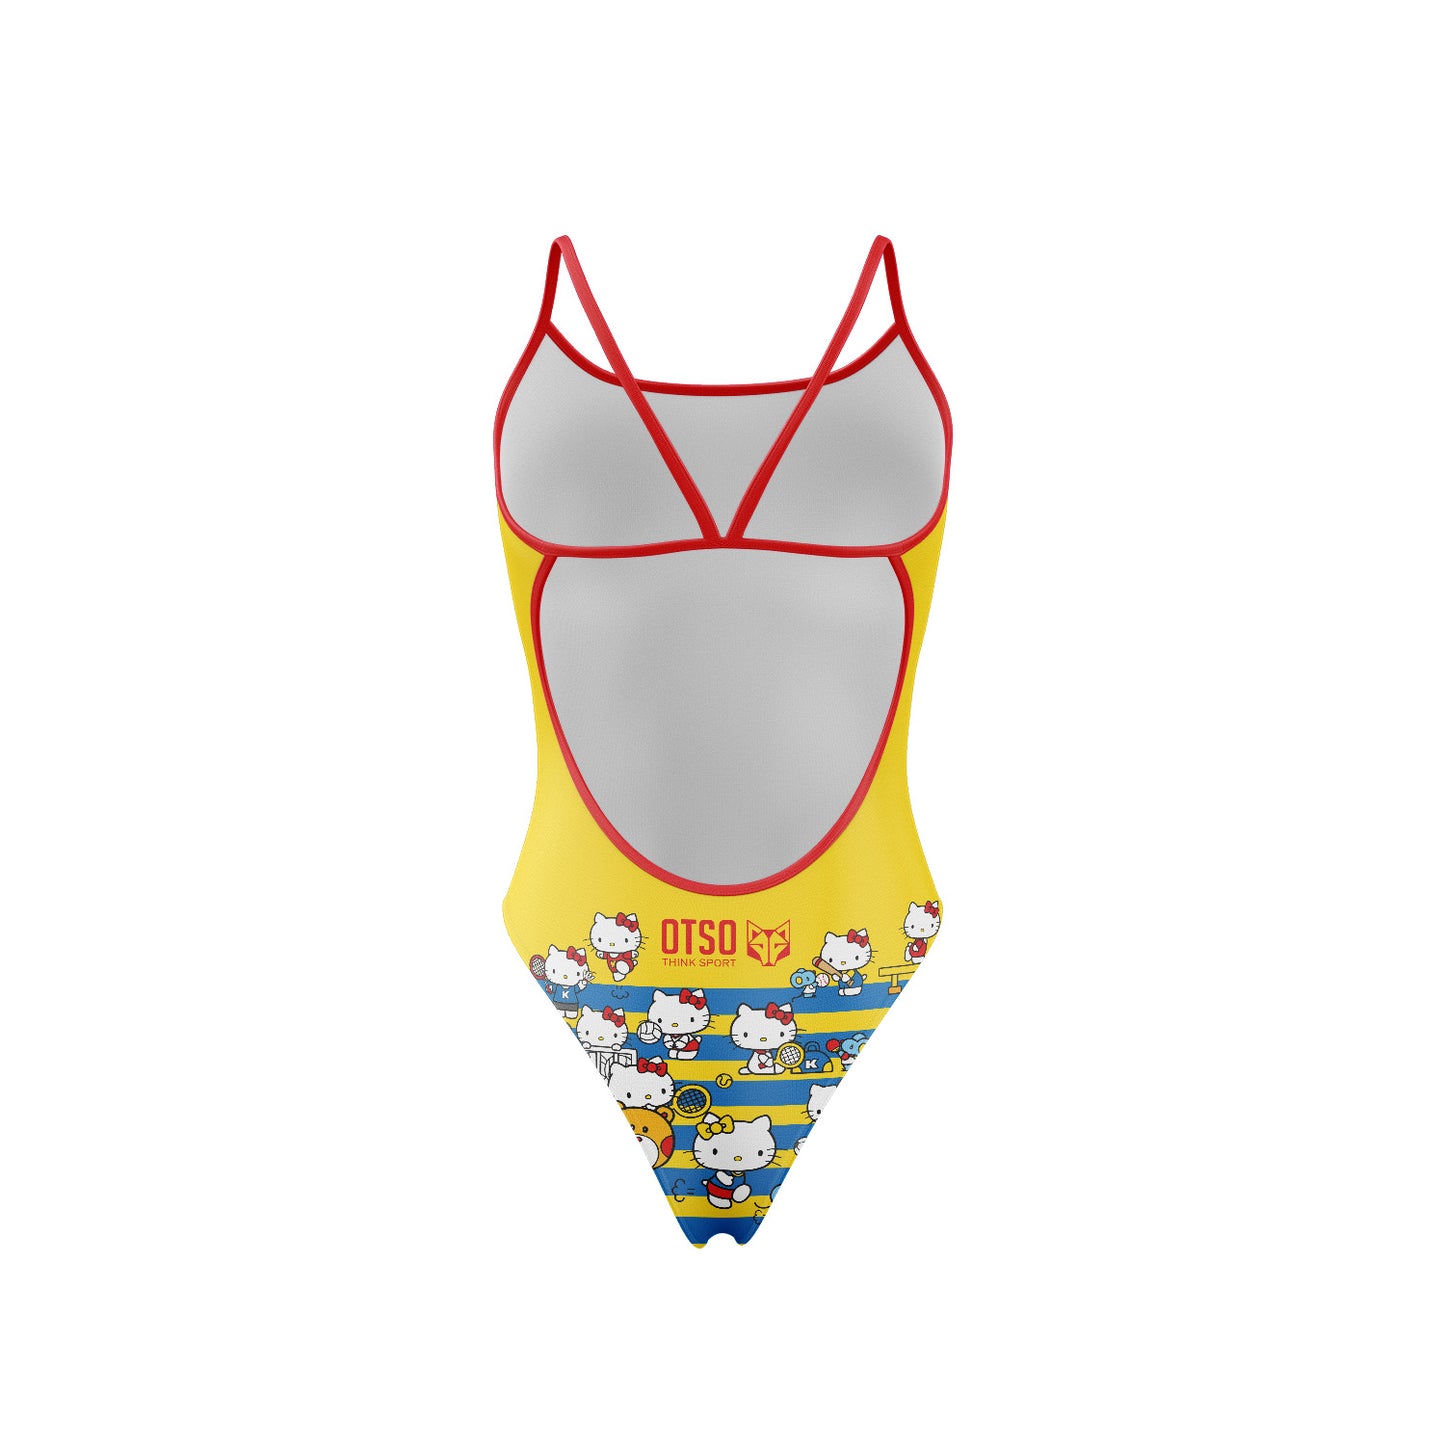 Girls and women's swimsuit - Hello Kitty Sports